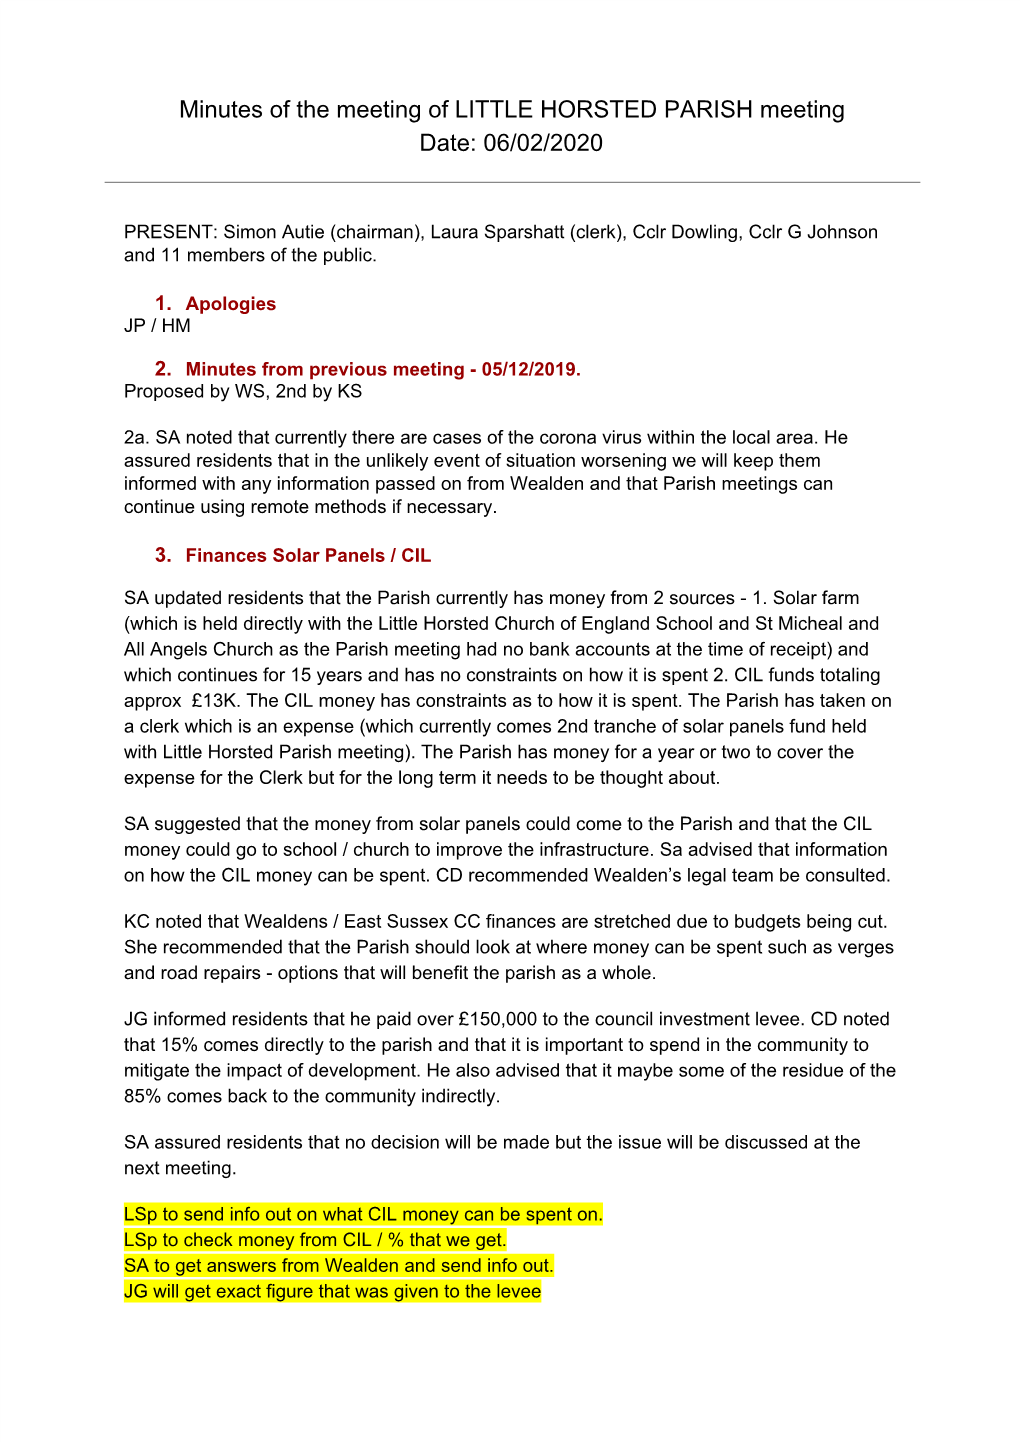 Minutes of the Meeting of LITTLE HORSTED PARISH Meeting Date: 06/02/2020